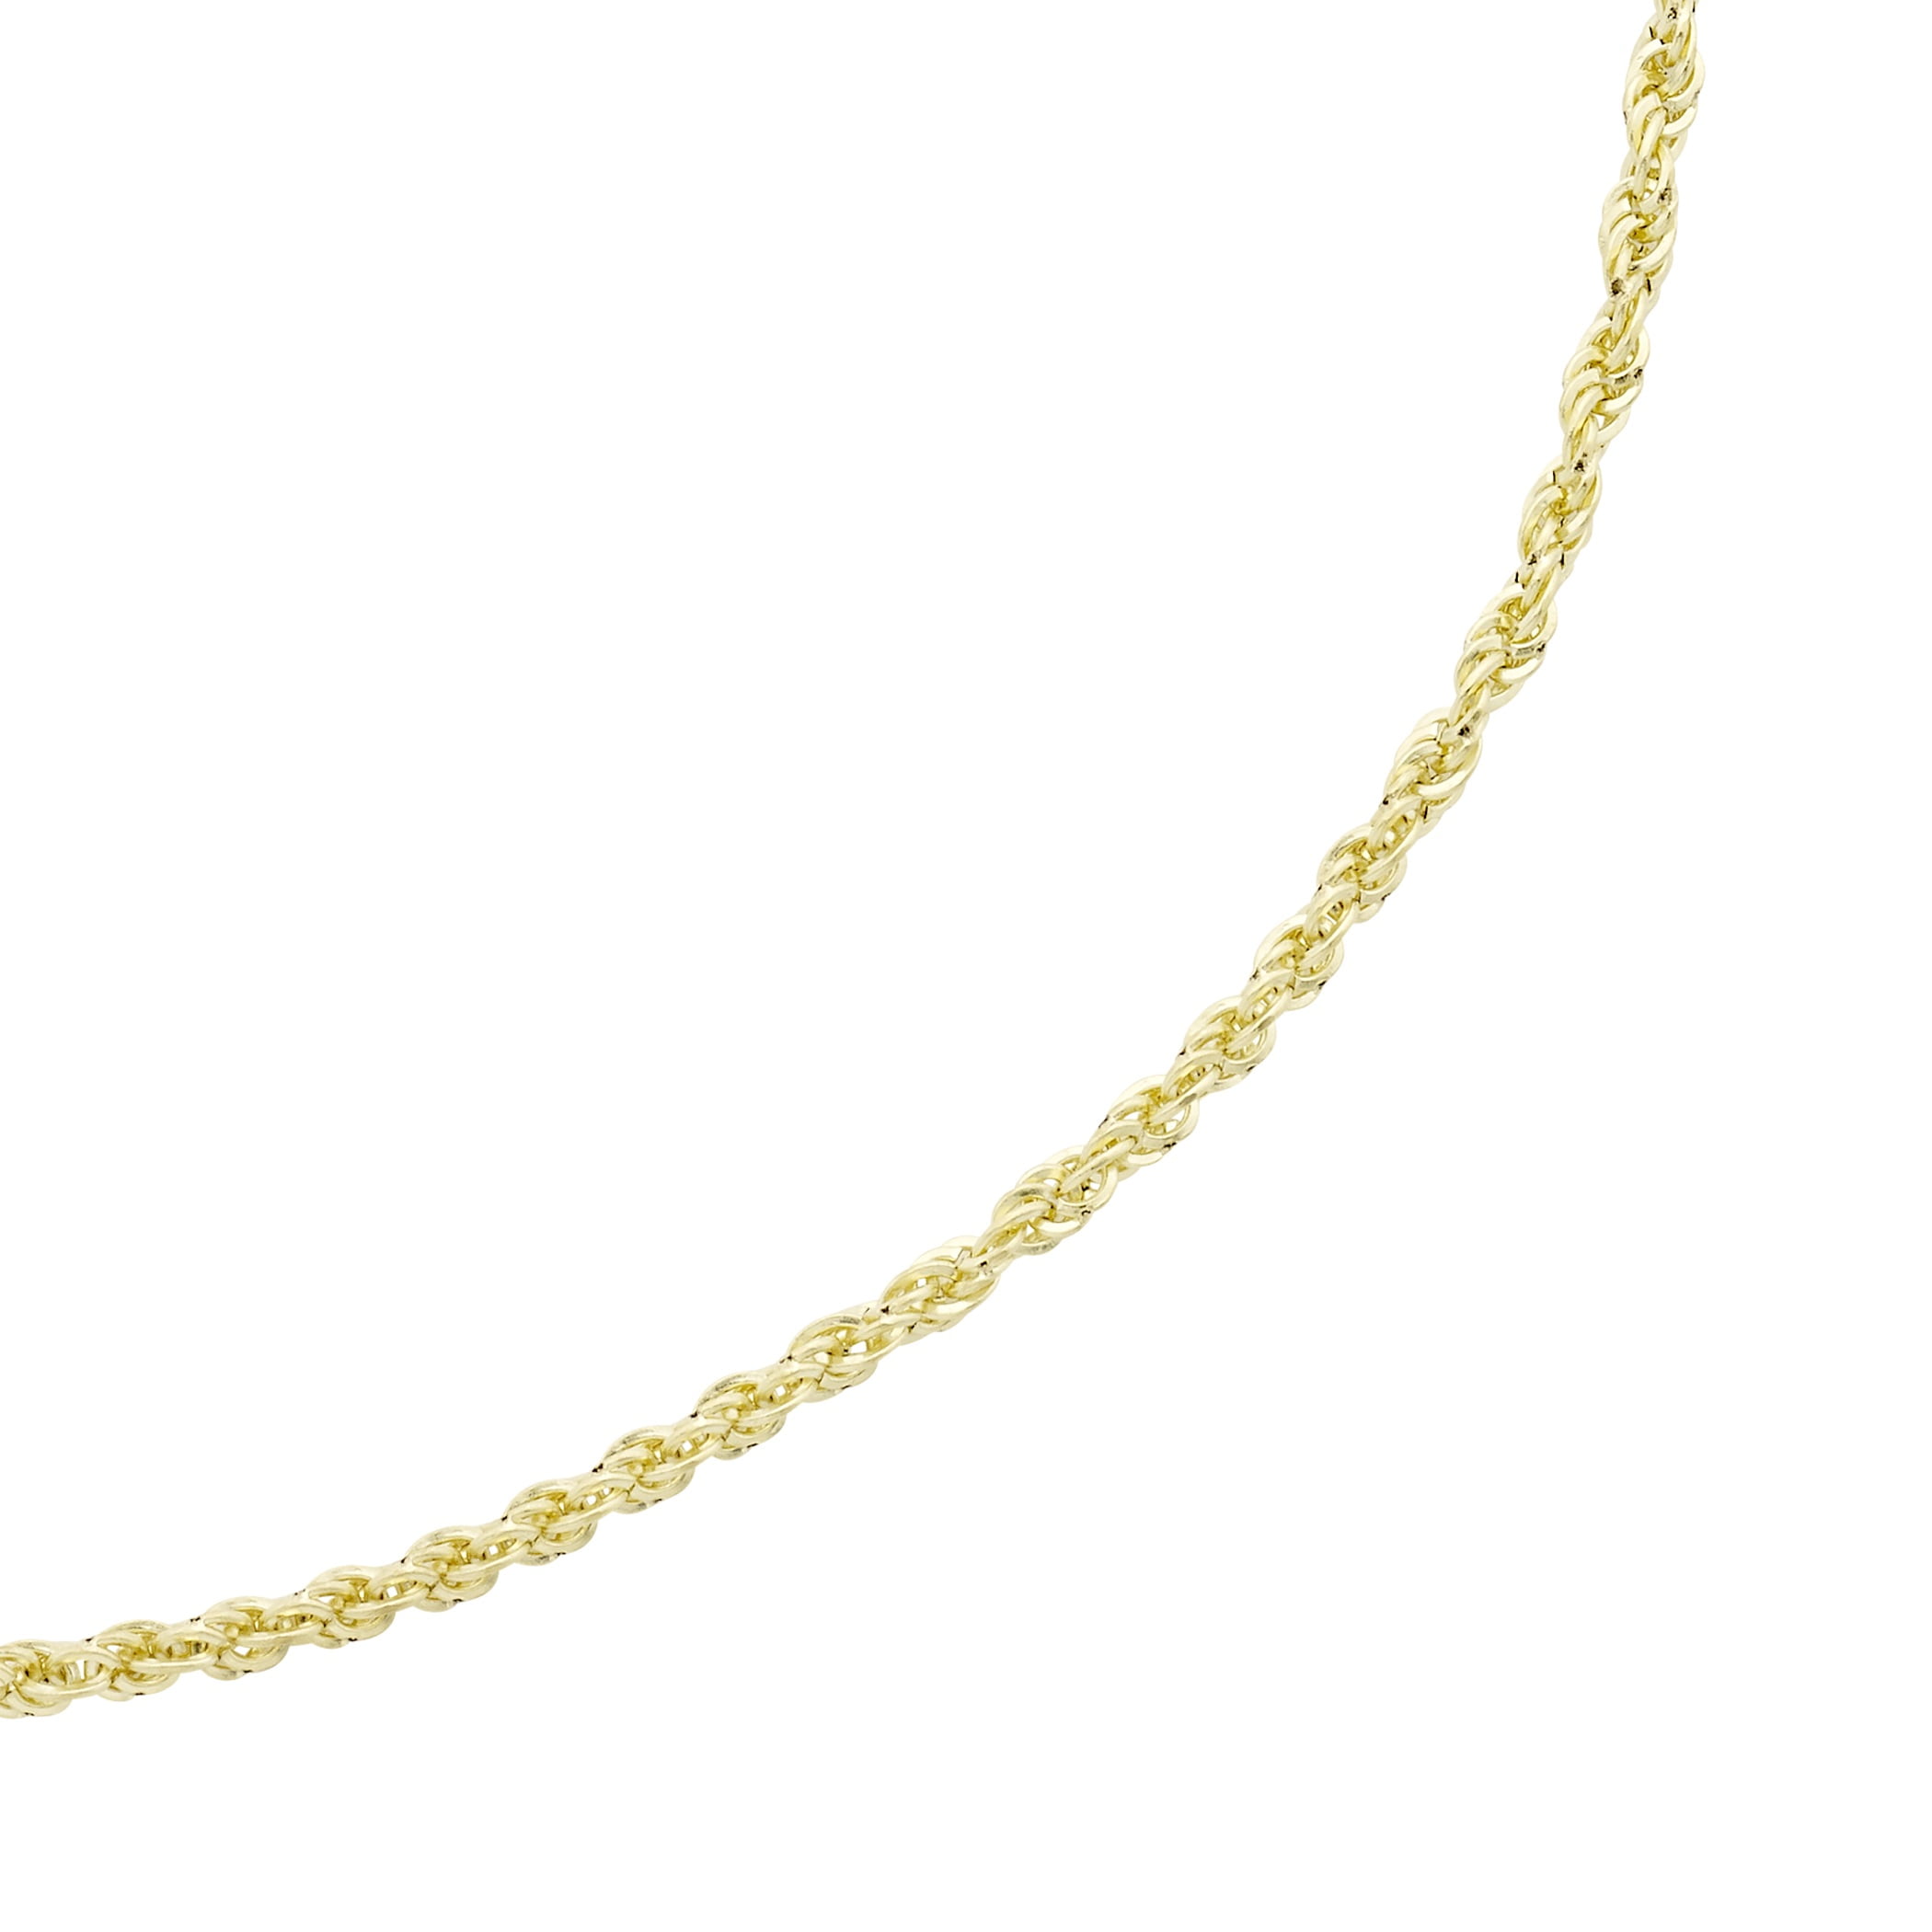  Honolulu Jewelry Company 14K Real Solid Yellow Gold 1mm Rope  Chain Necklace Lobster Clasp - 16 Inches: Clothing, Shoes & Jewelry